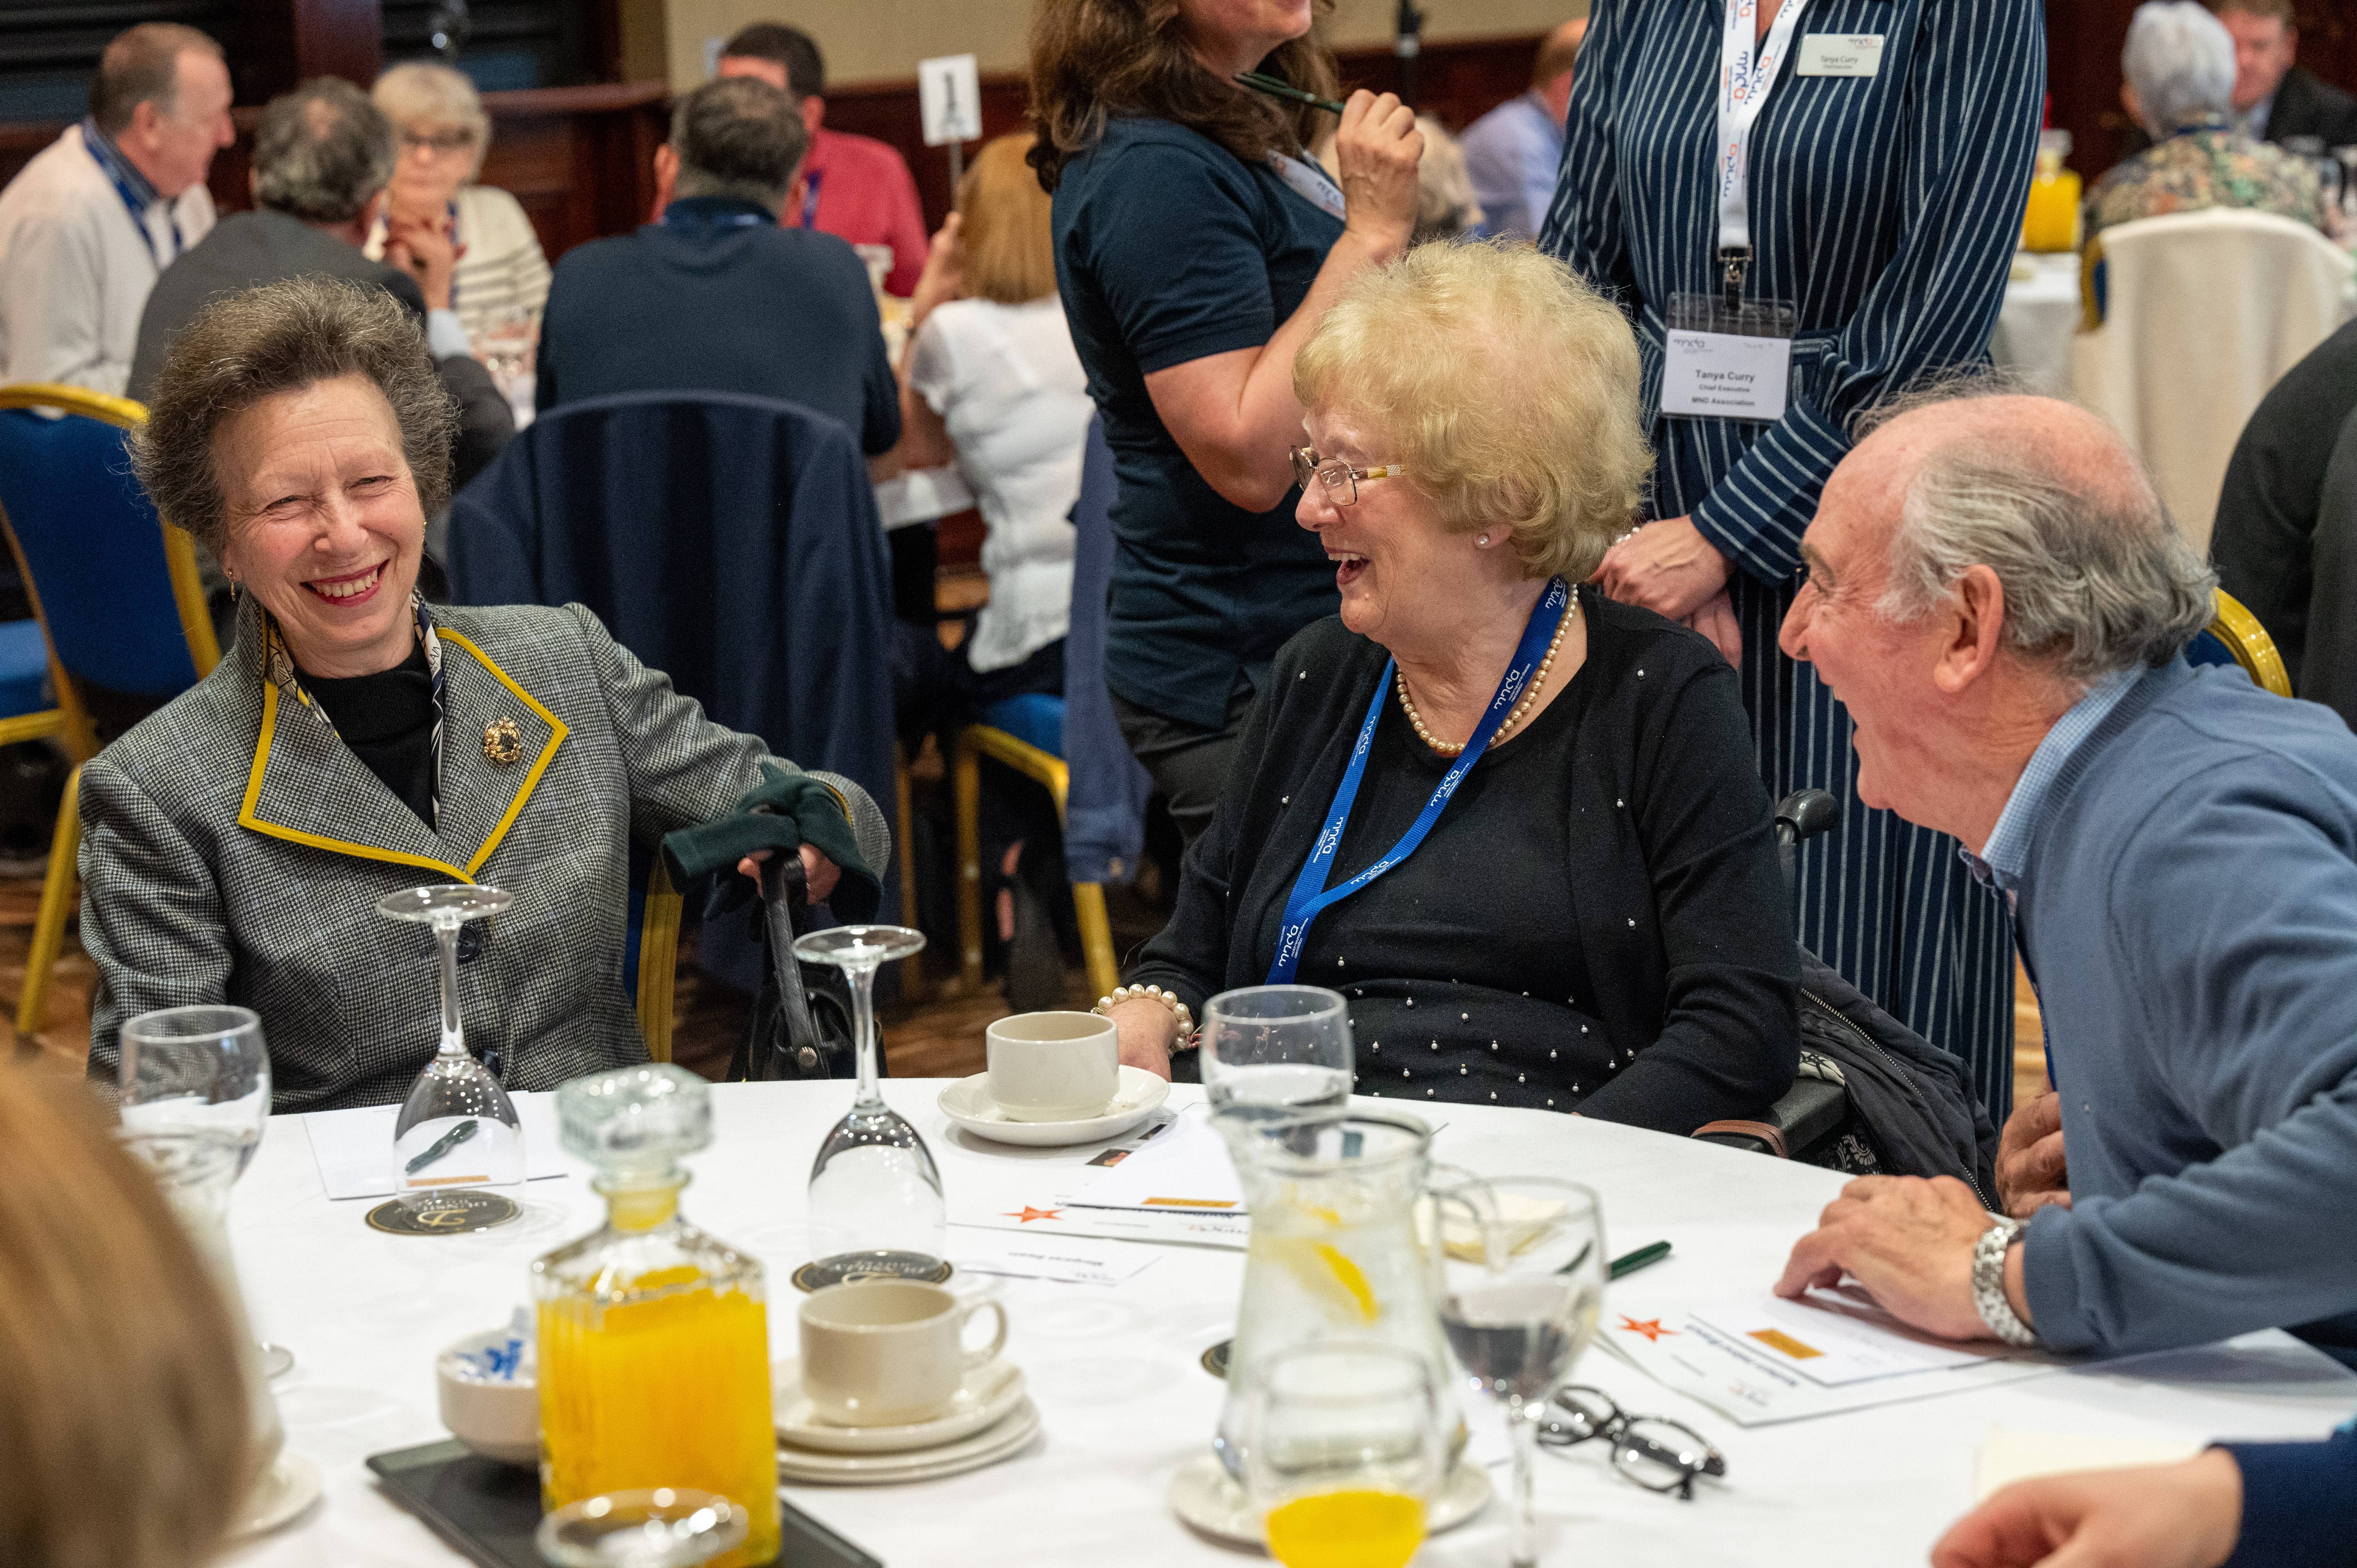 HRH The Princess Royal engaging in conversation and smiling at a table with a woman and man